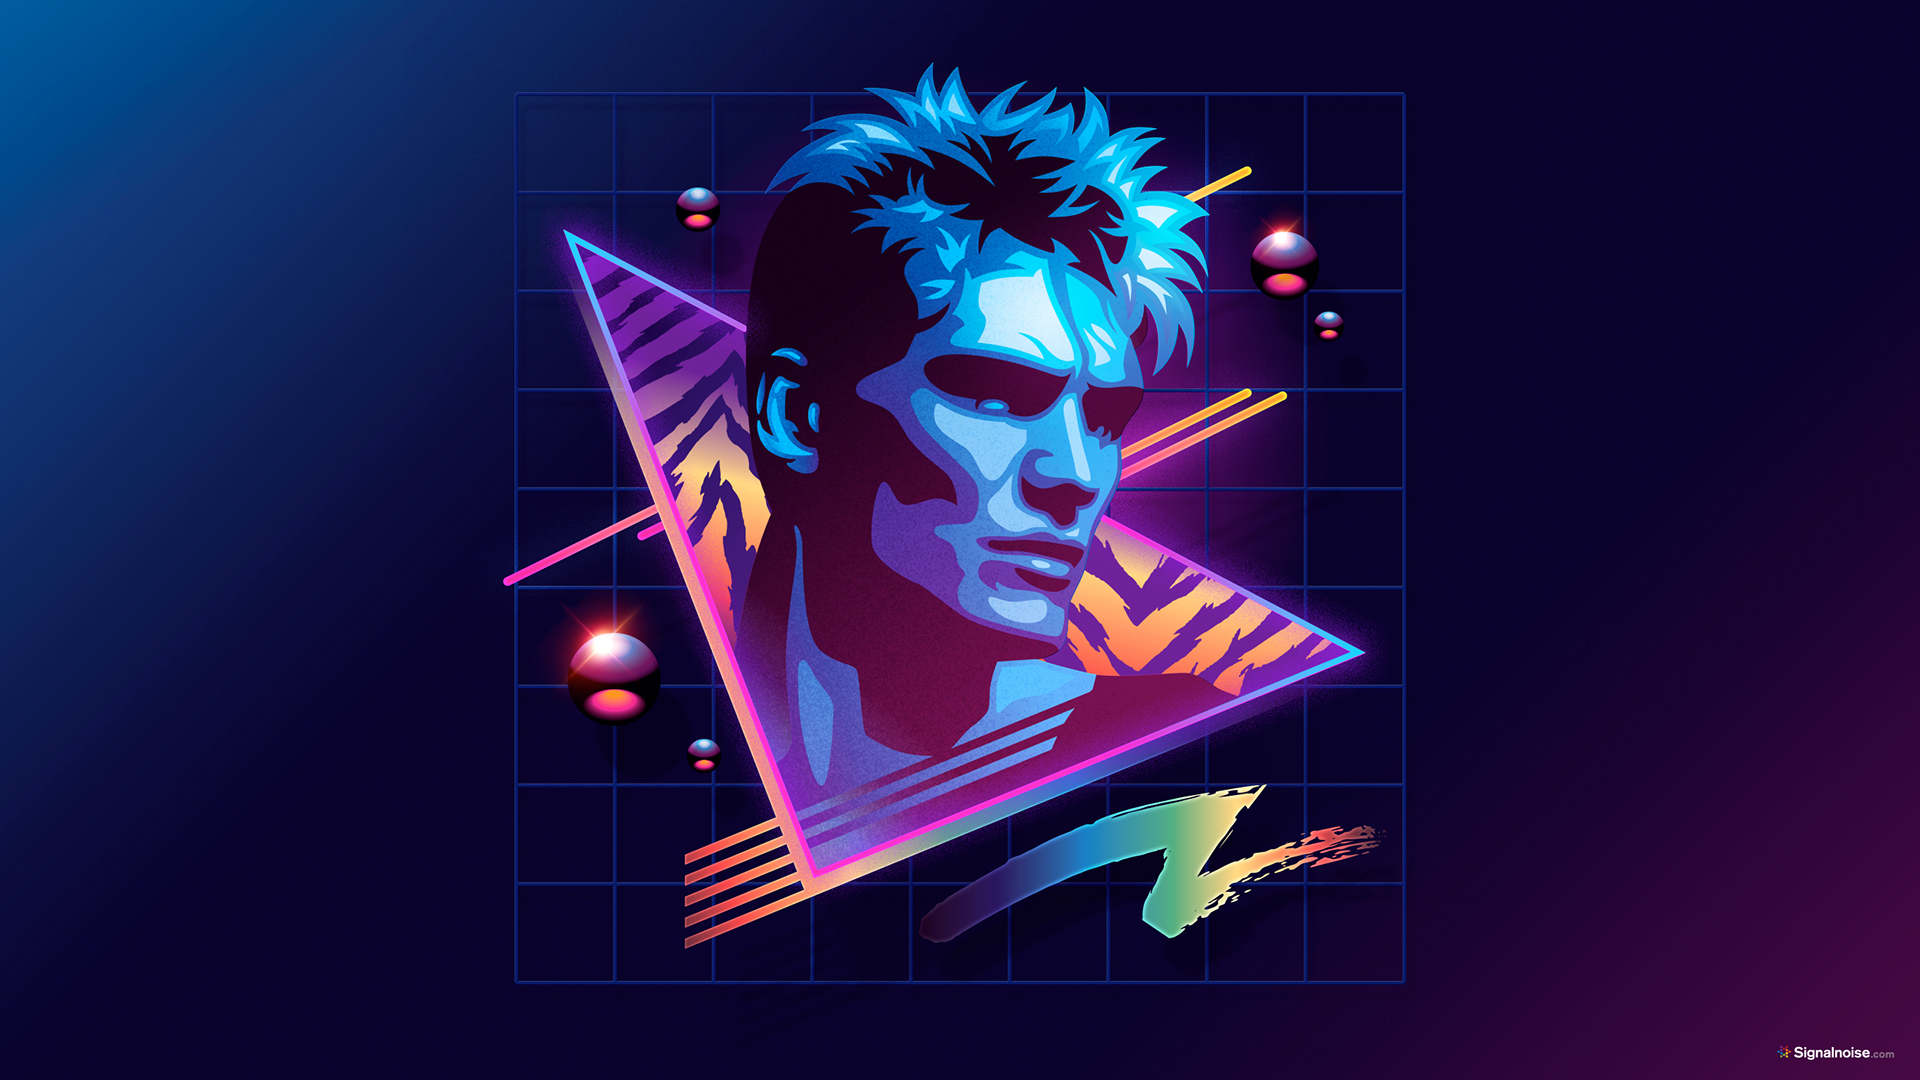 Dolph Lundgren 80s Style Wallpaper [1920 x 1080] wallpapers